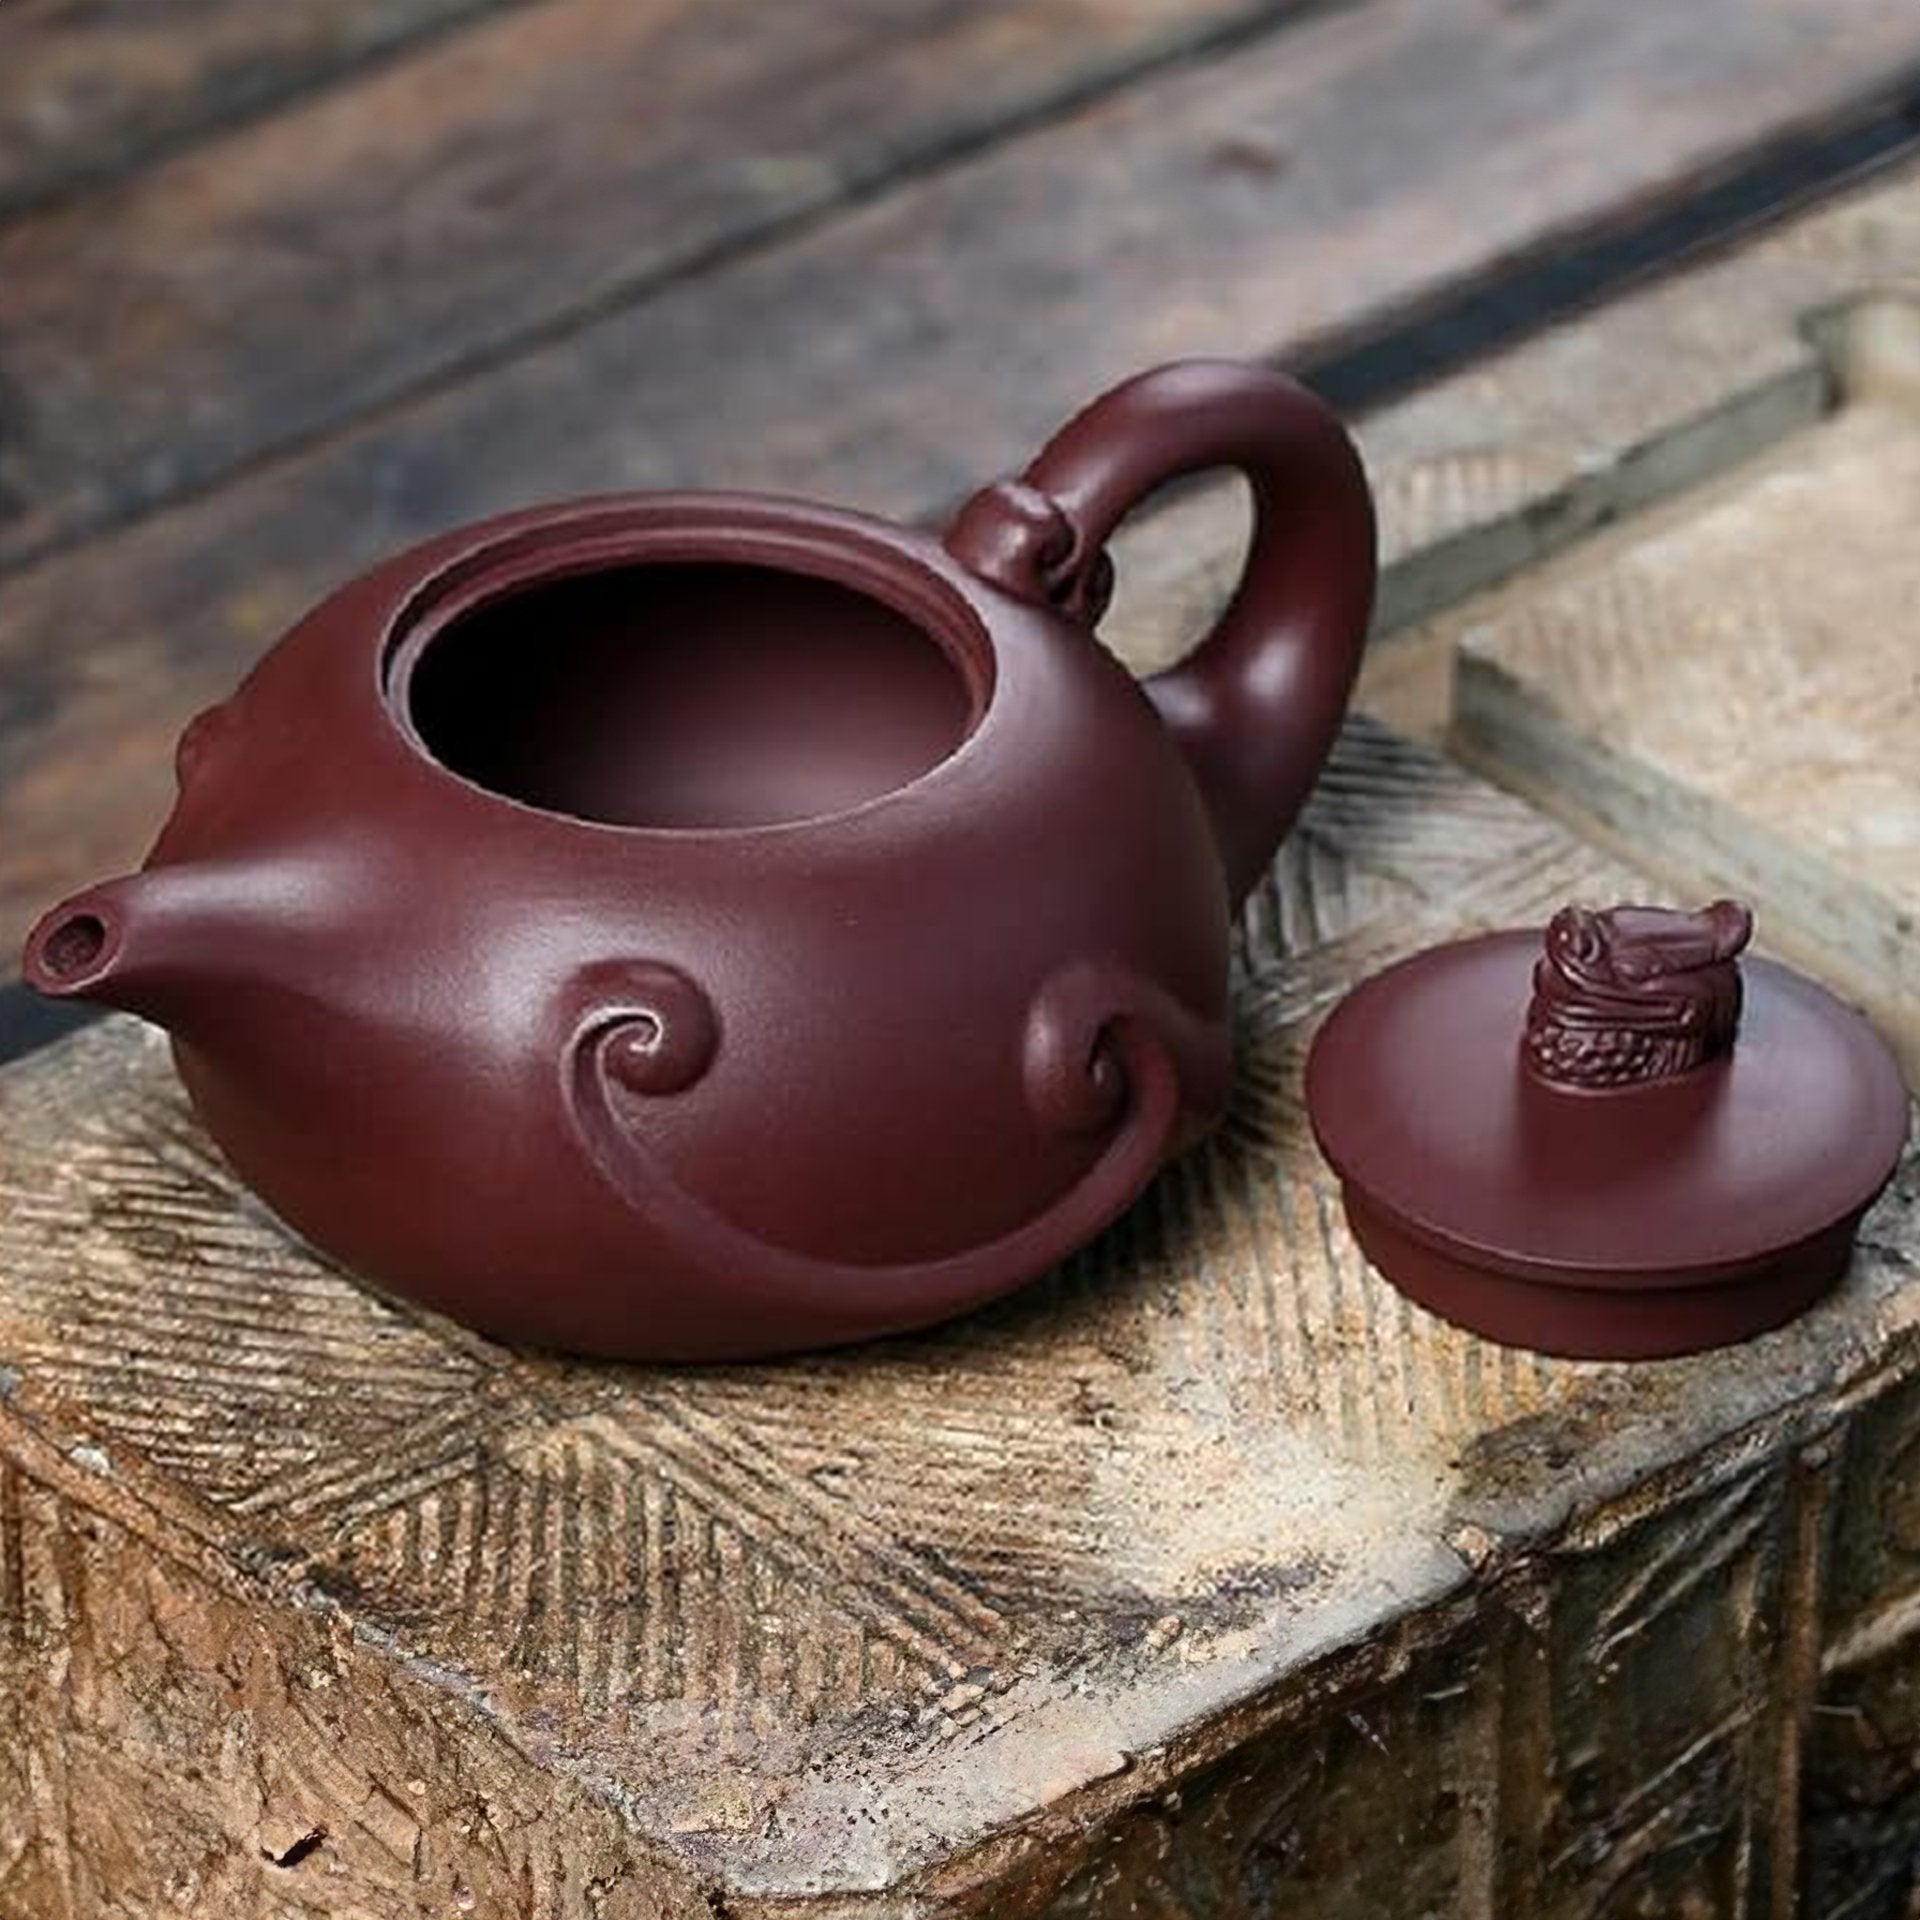 Close-up of a dark brown teapot with a dragon figurine on the lid.